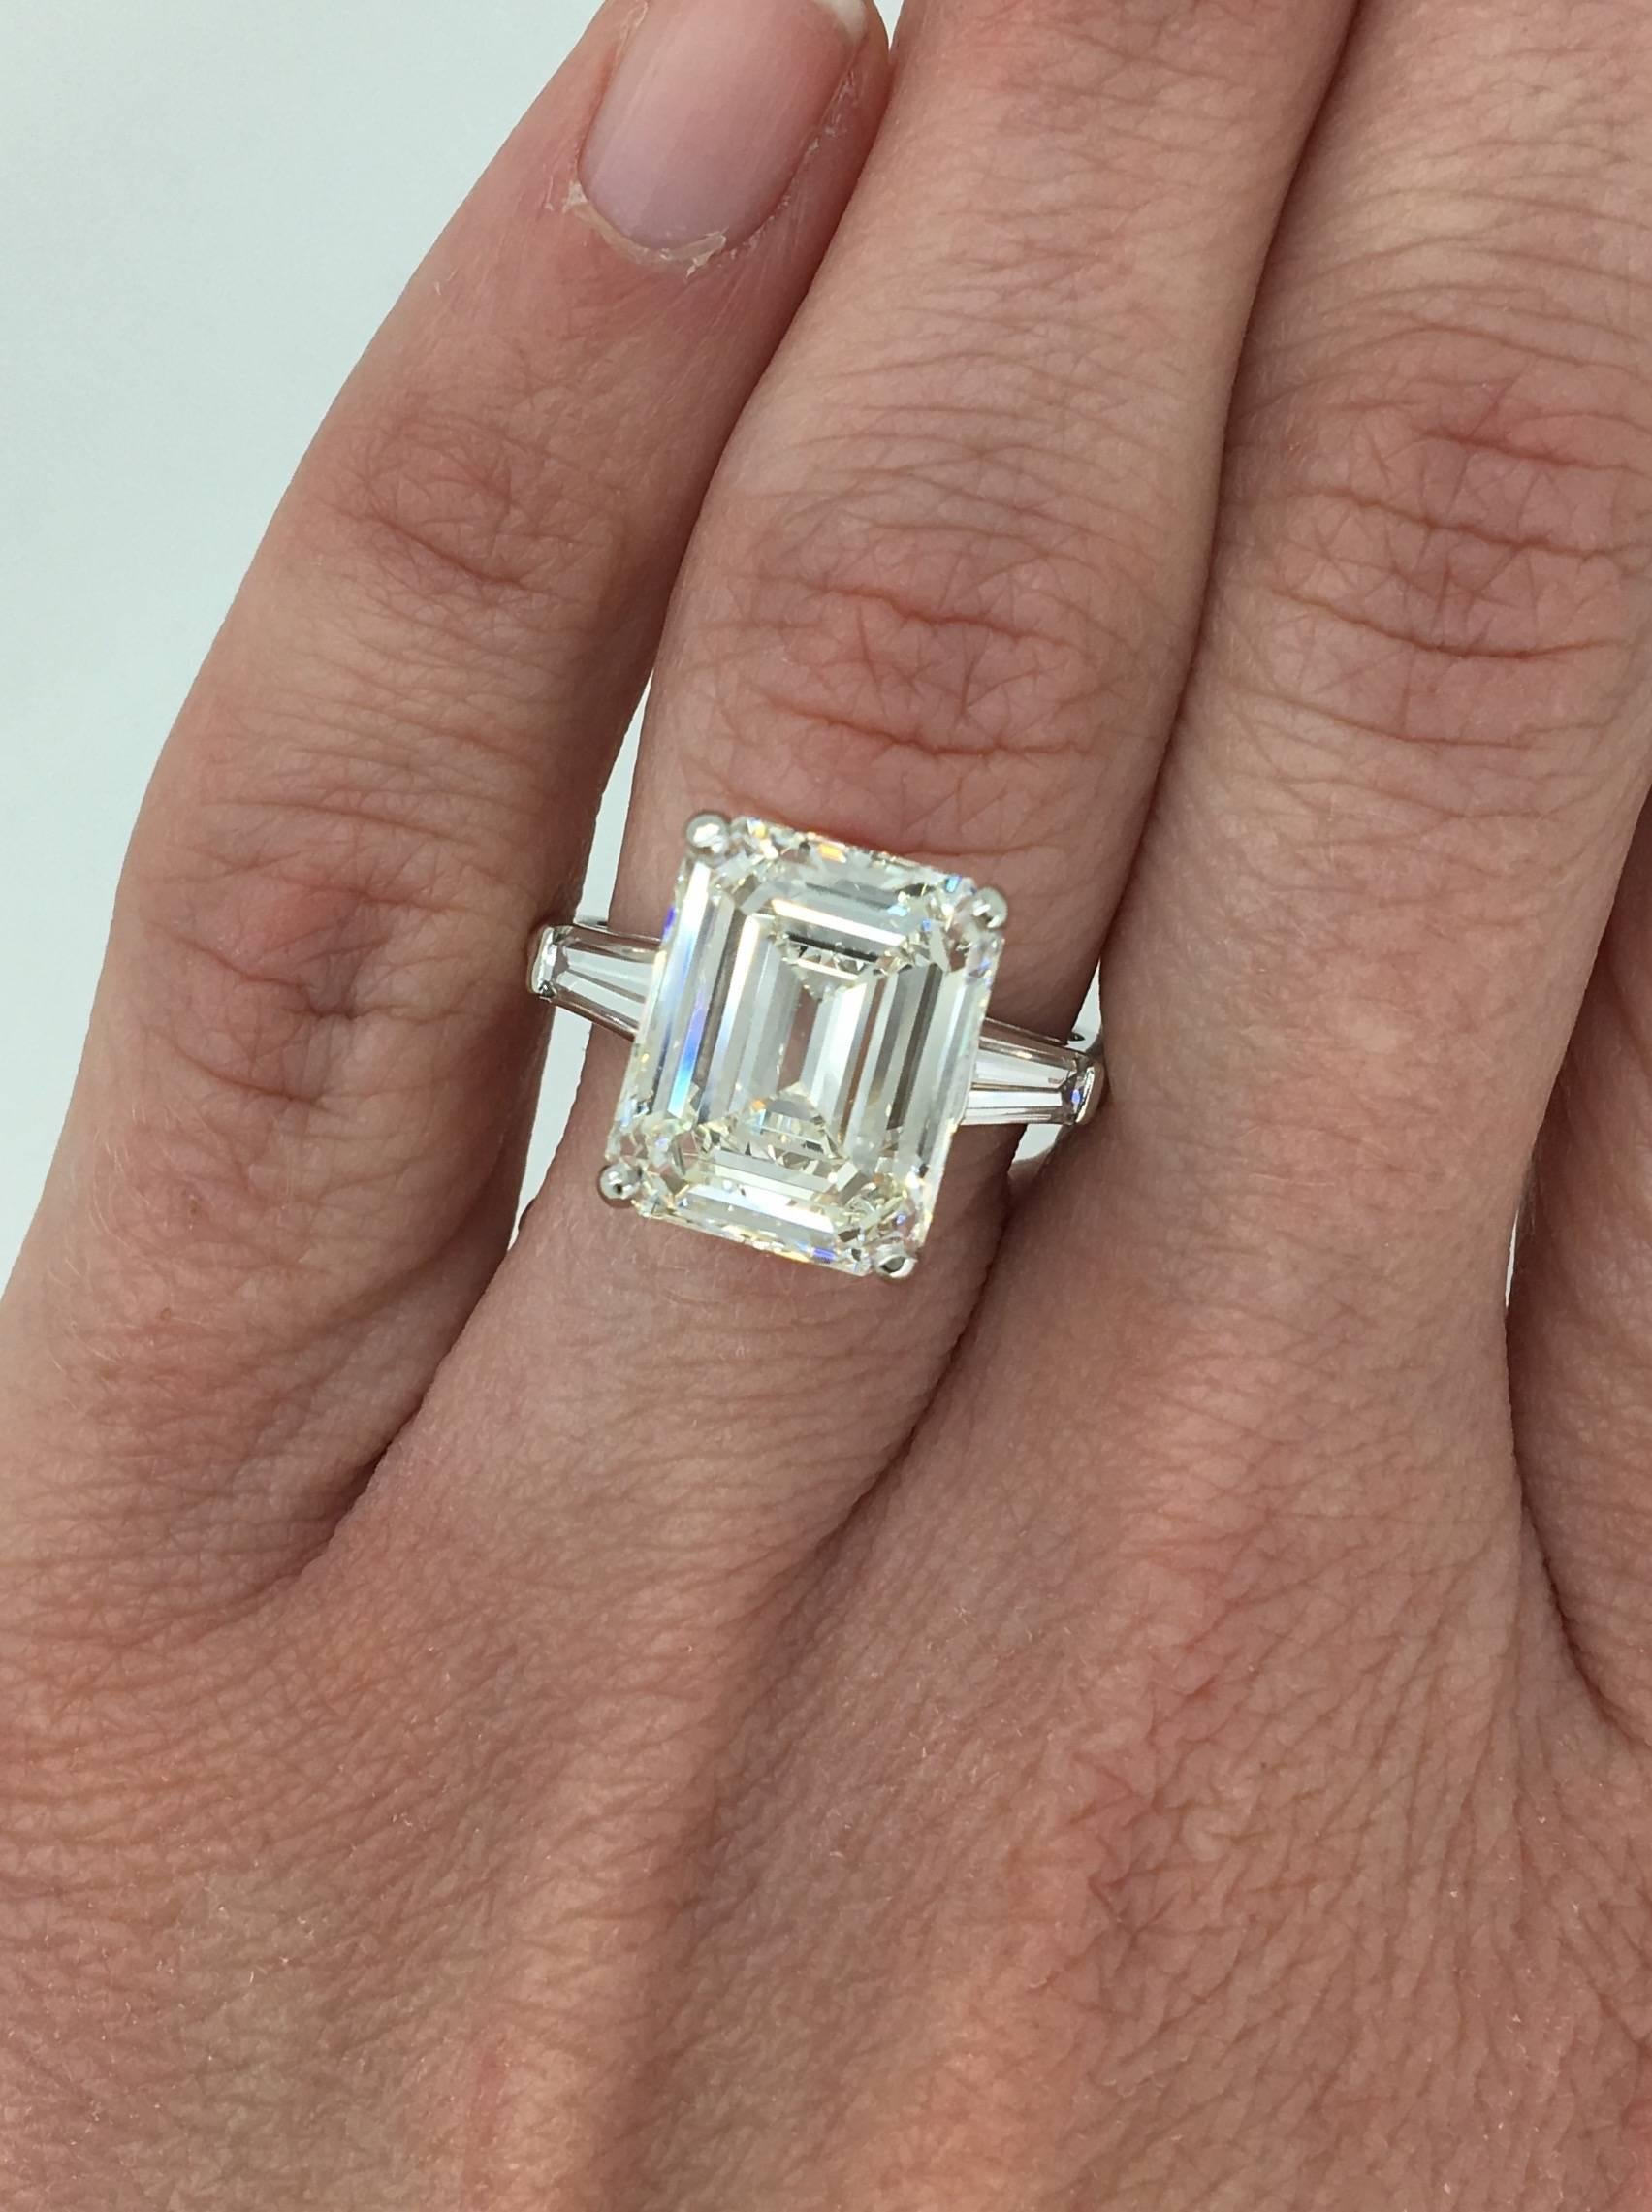 Classic ring features a stunning GIA Certified 6.21CT Emerald Cut Diamond in the center with J color and VS1 clarity. There are two tapered baguettes accenting the featured diamond. The platinum ring houses approximately 6.81CTW of diamonds. This